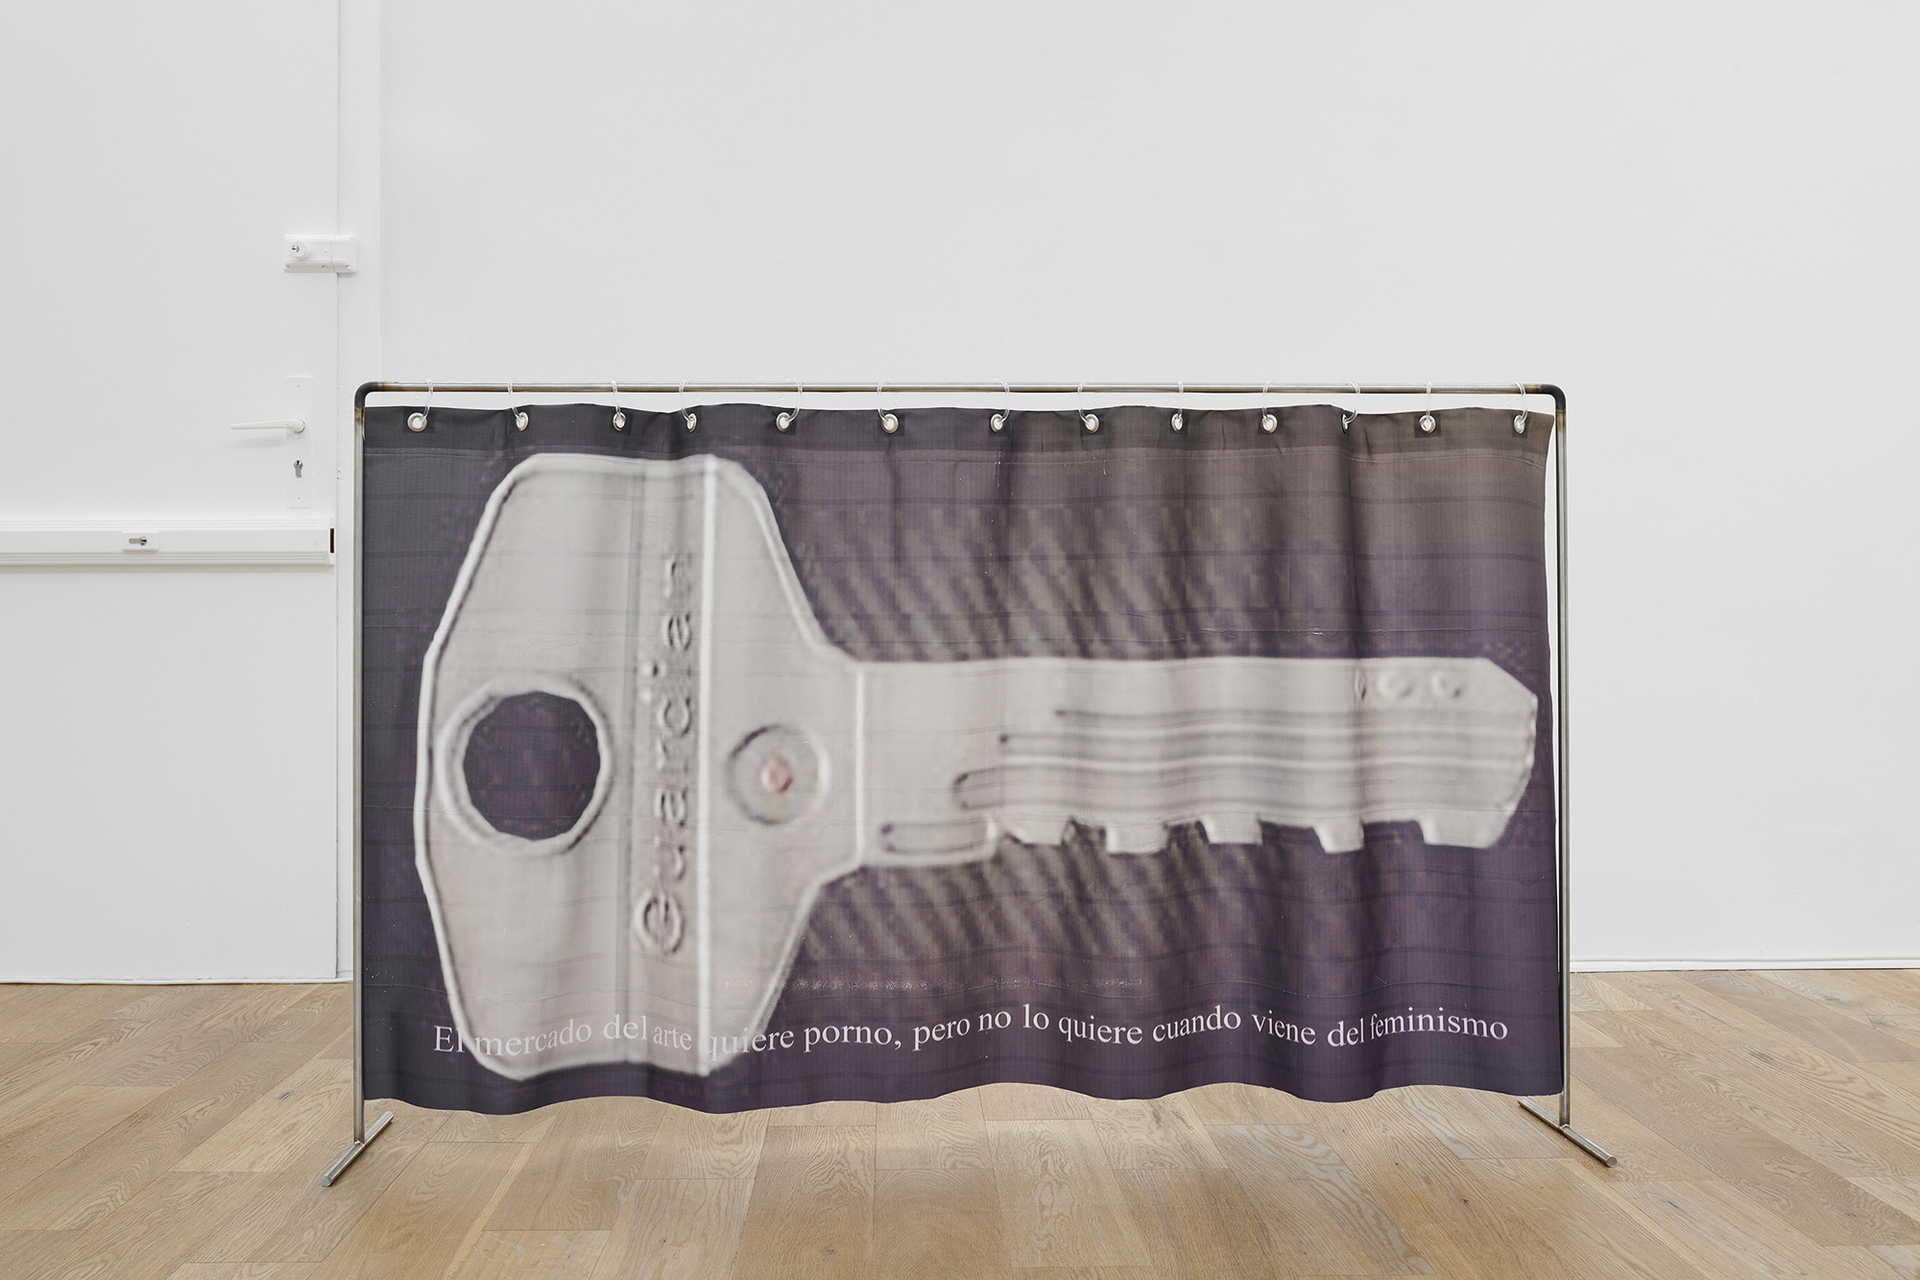 Andrey Bogush, Guardian (The art market wants porn, but it doesn’t want it when it comes from feminism), 2020, UV print on curtain, eyelets, PVC hangers, steel rack, 100 x 160 cm